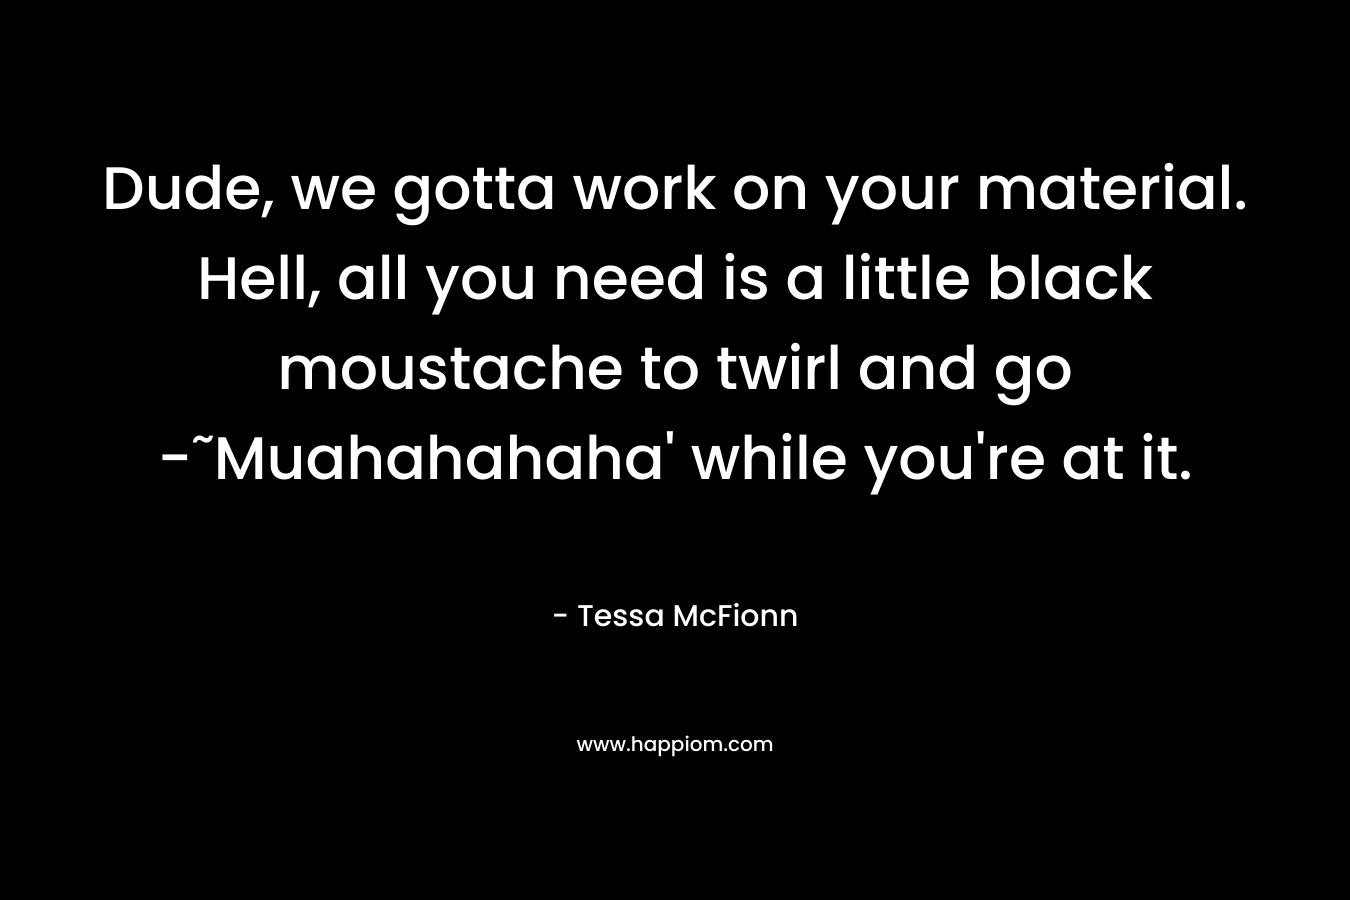 Dude, we gotta work on your material. Hell, all you need is a little black moustache to twirl and go -˜Muahahahaha’ while you’re at it. – Tessa McFionn